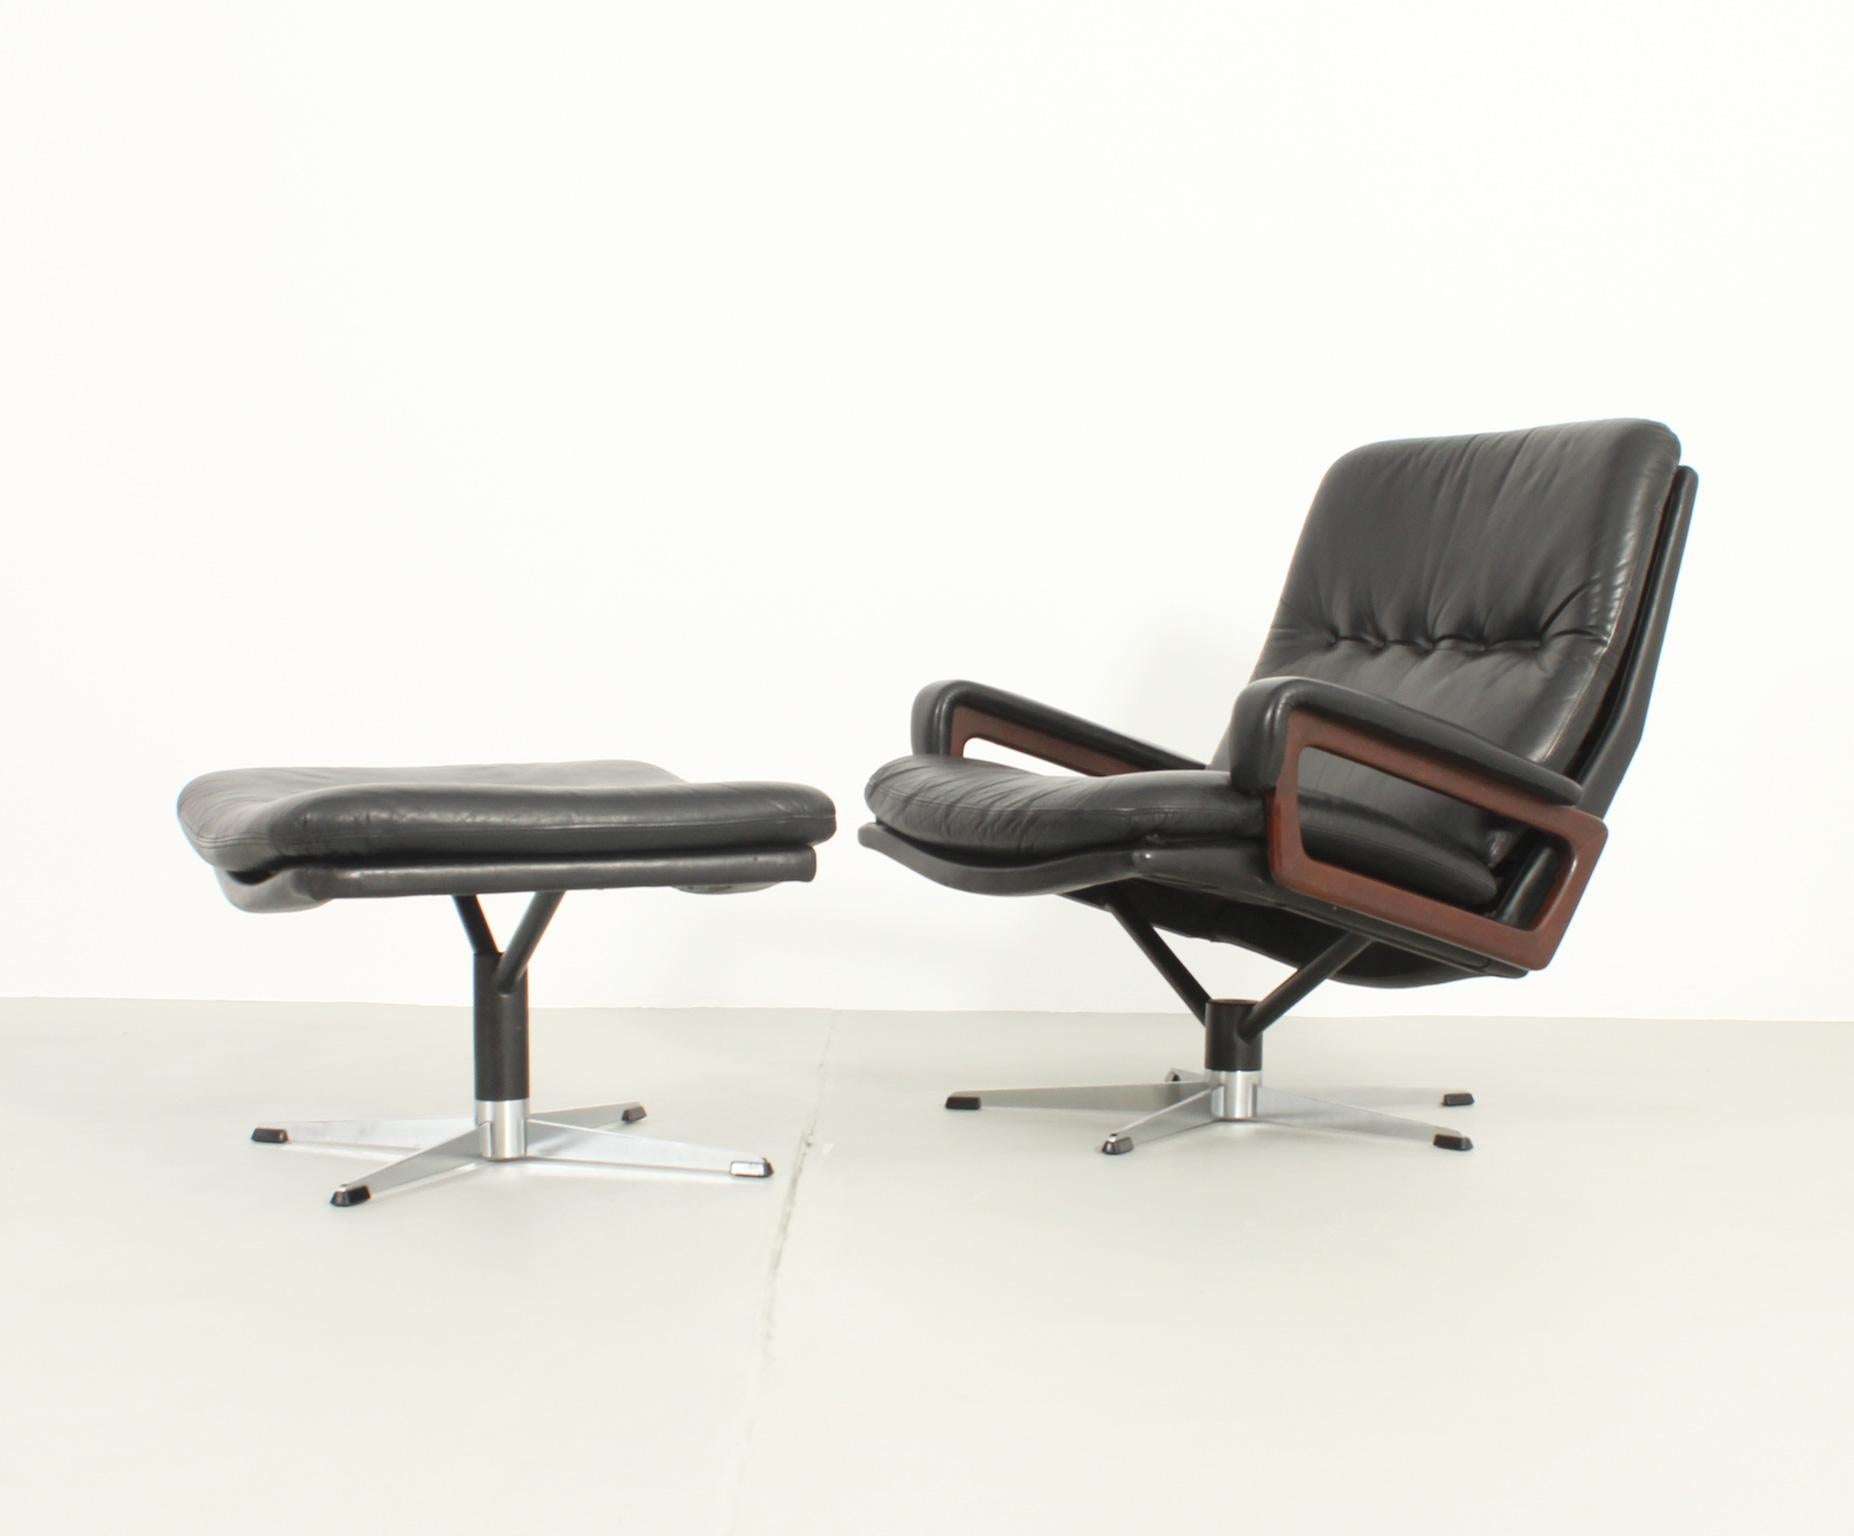 King lounge chair with ottoman designed by André Vandenbeuck in 1960's and produced by Arflex, Italy. Swivel lounge chair and ottoman upholstered in leather, wood arms and polished steel base.